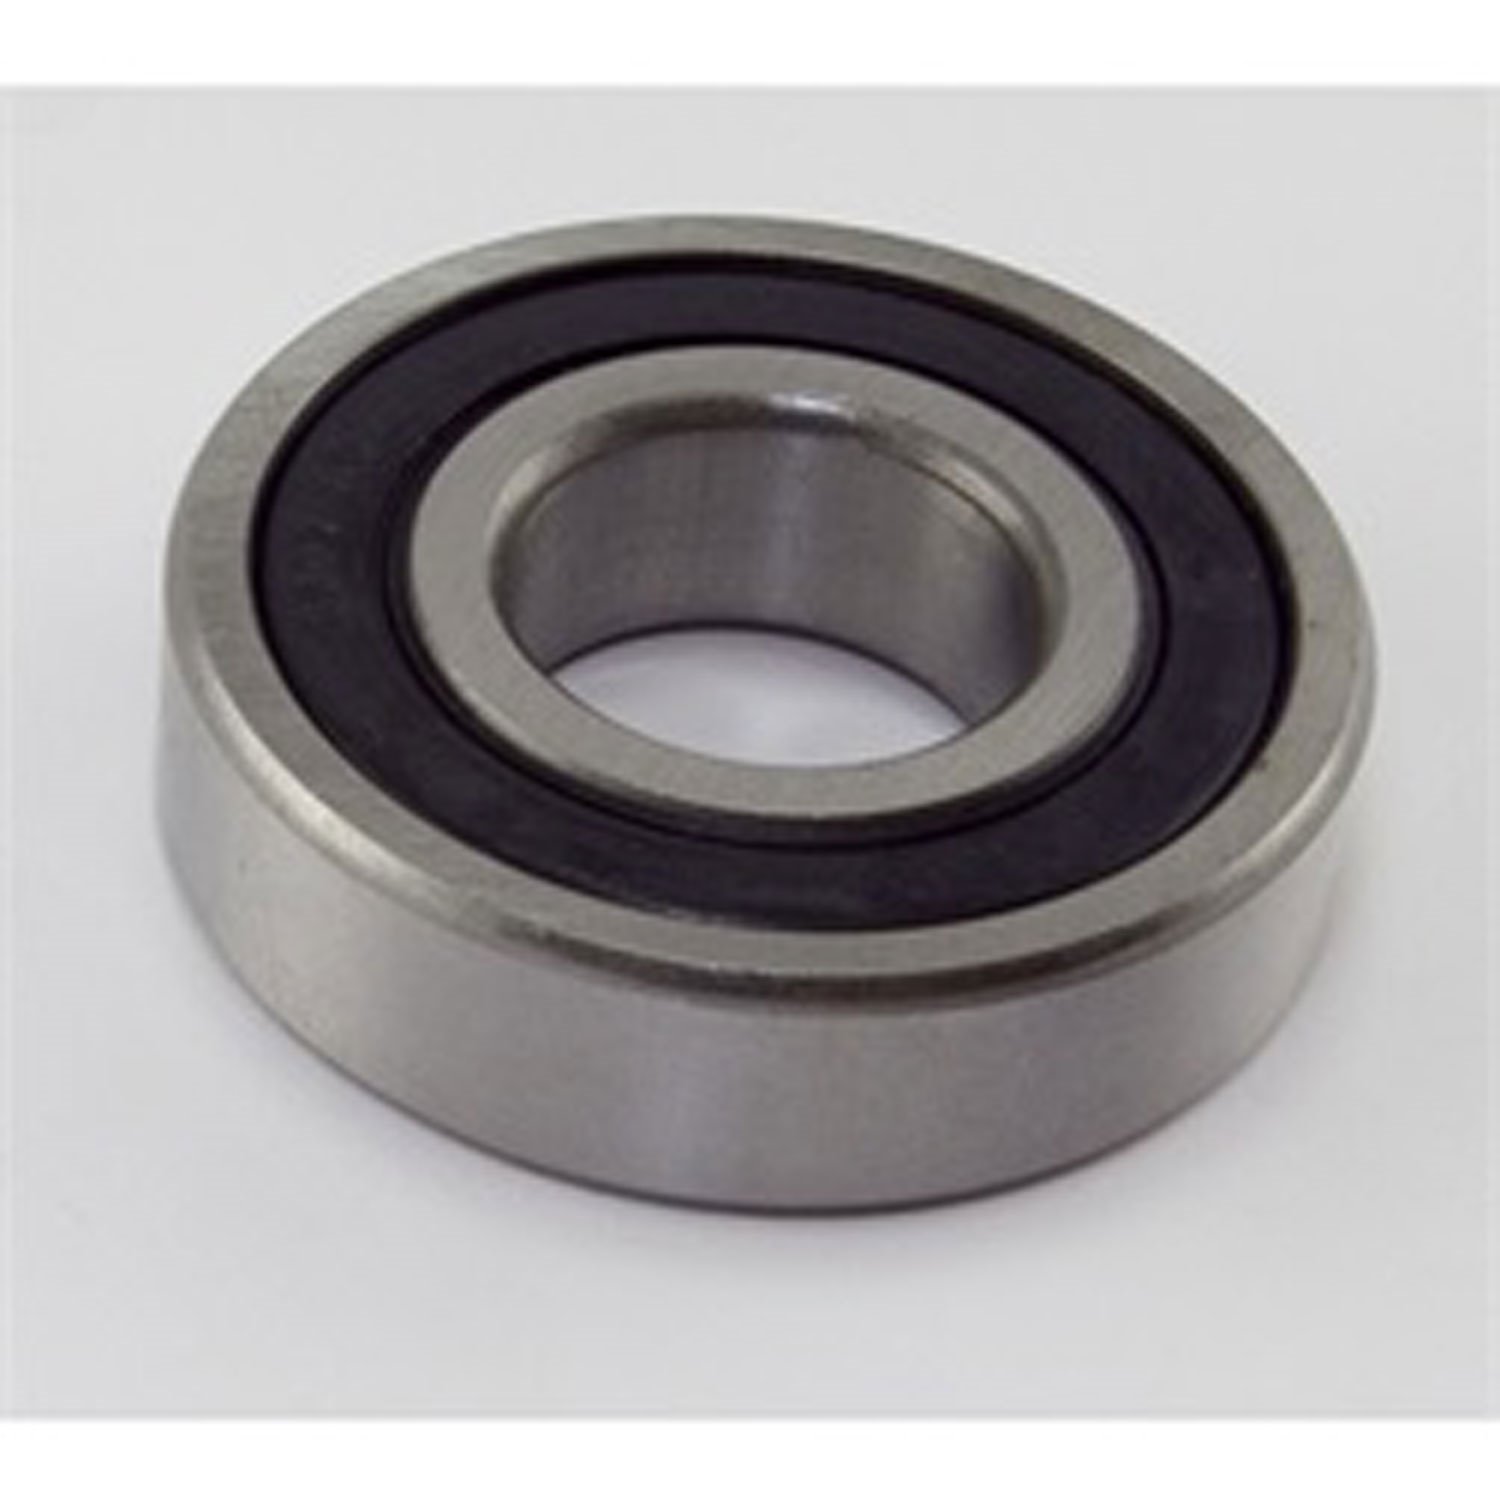 This Timken sealed transfer case output shaft bearing fits 41-79 Willys and Jeep models.